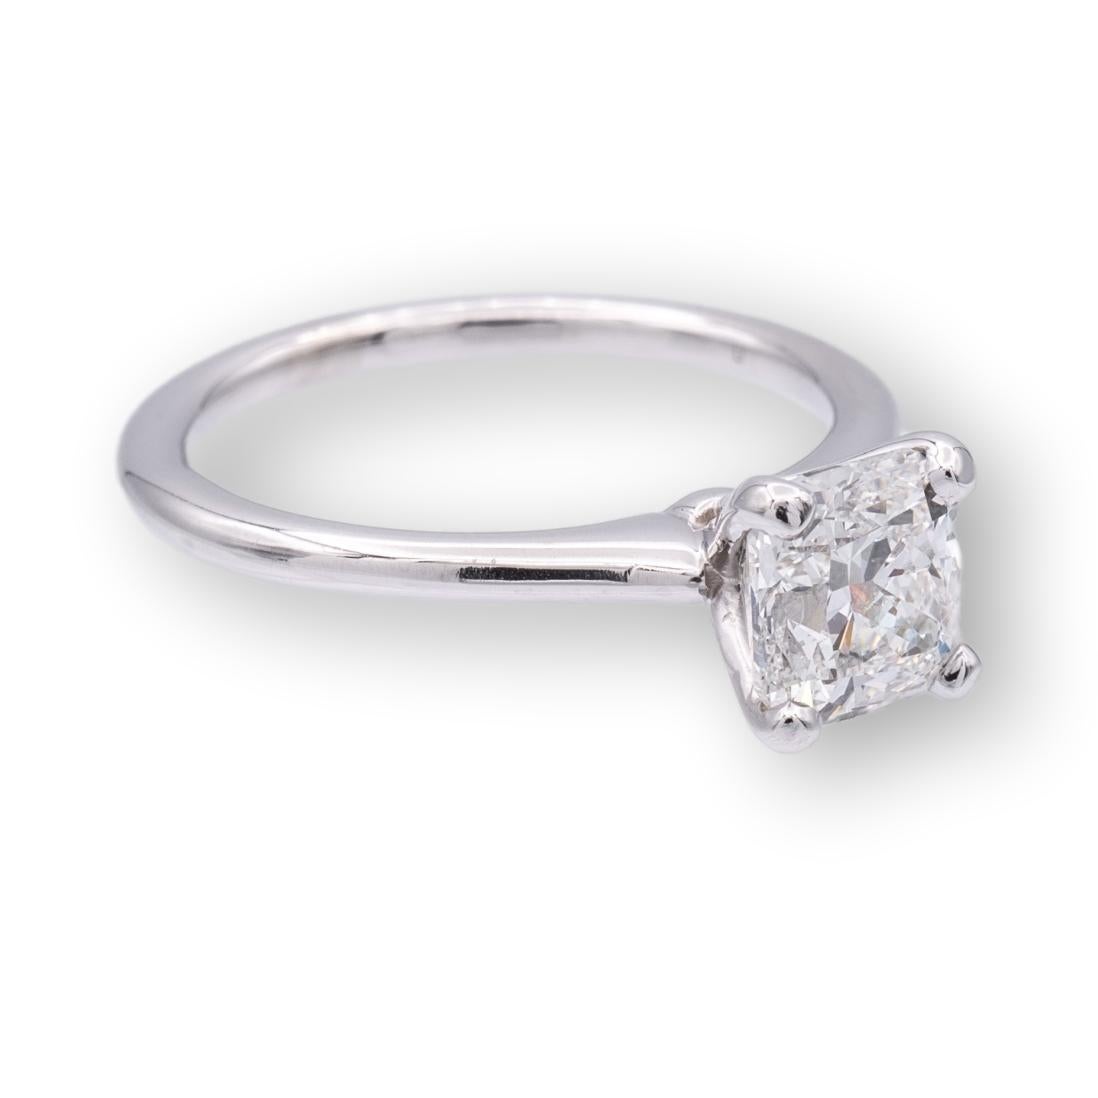 Engagement ring from the Astor collection by Blue Nile featuring a center cushion brilliant diamond weighing 1.31 cts. F color , VS2 clarity certified by the GIA (Gemological Institute of America) with excellent polish and symmetry finely crafted in